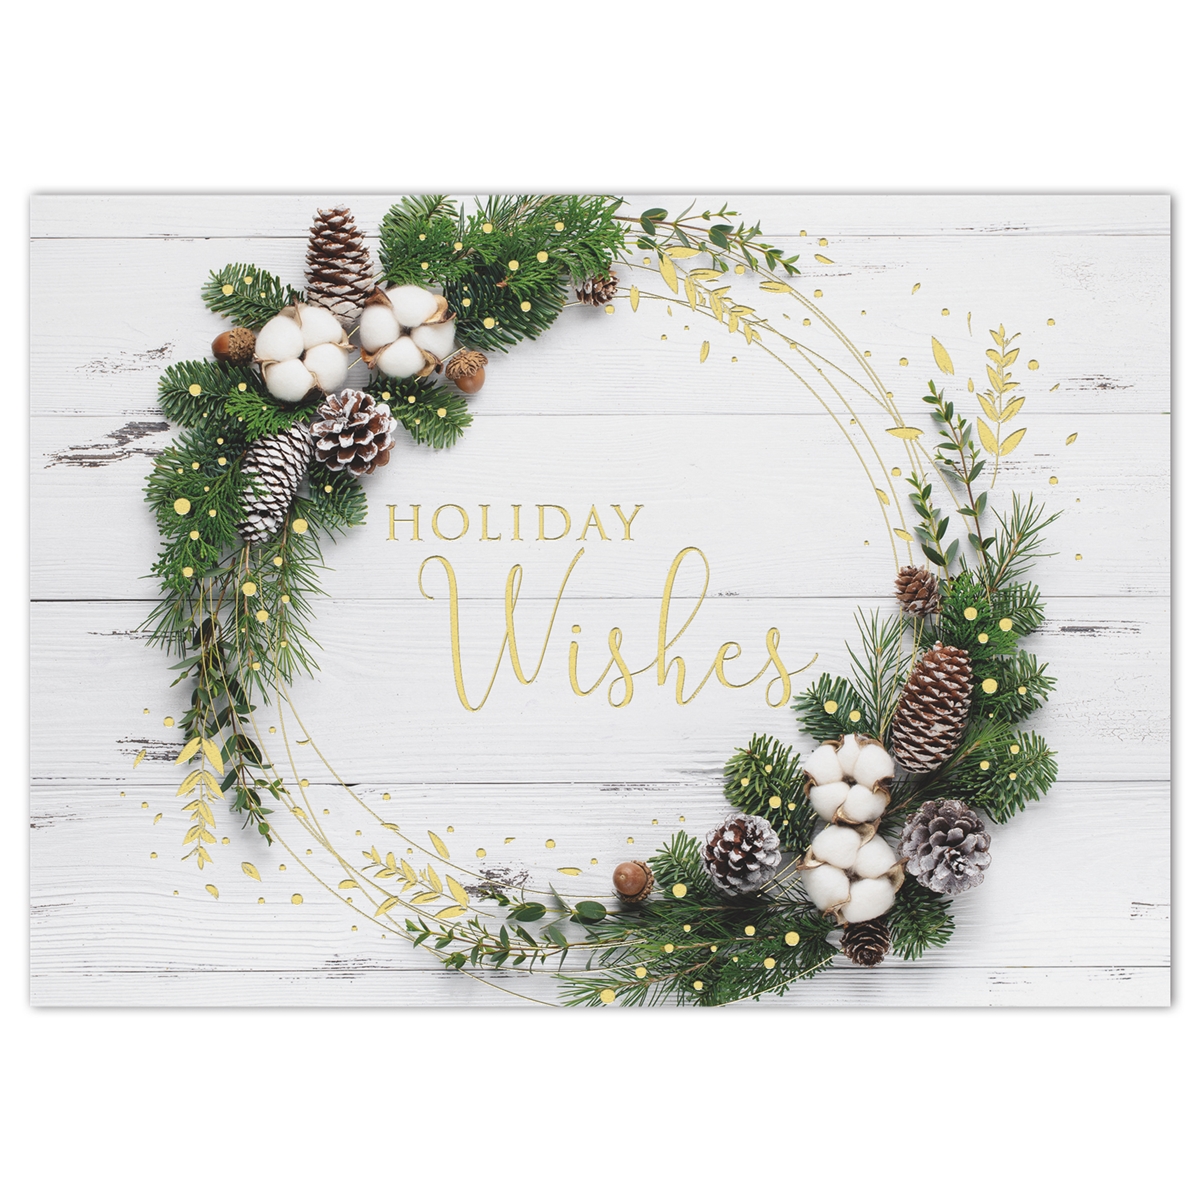 Rustic Style Holiday Cards